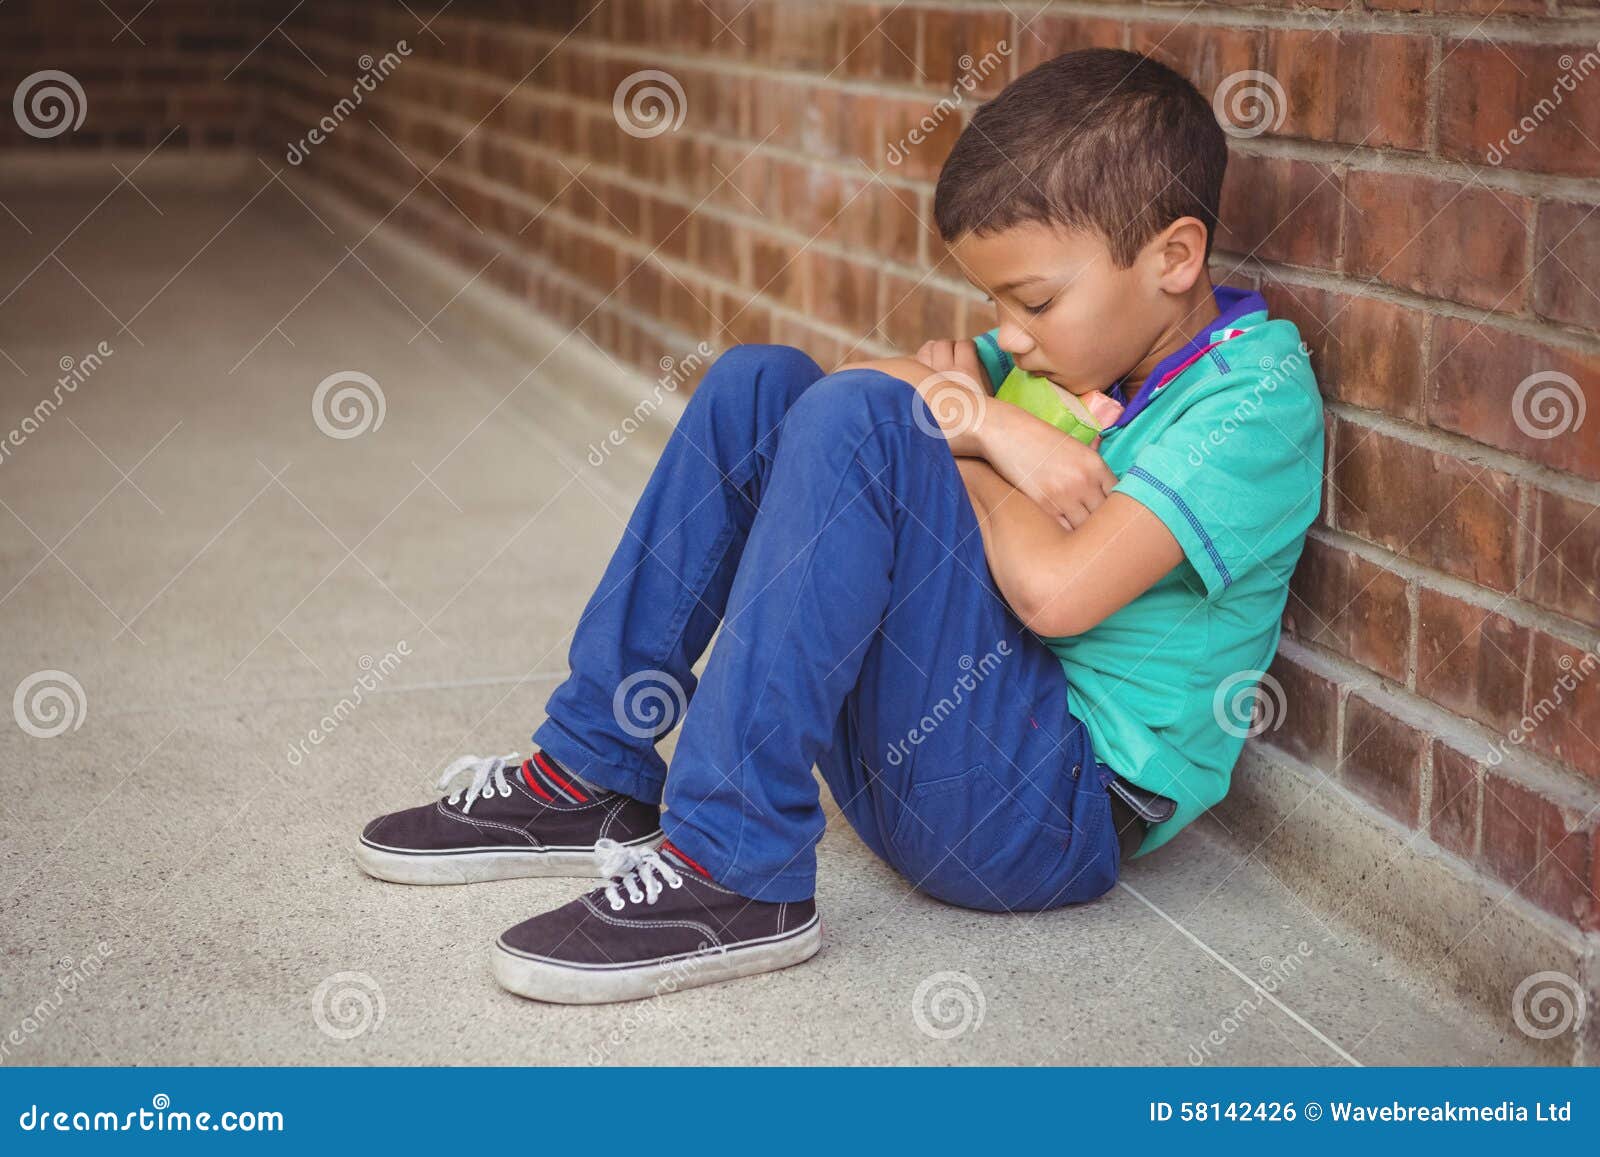 upset lonely child sitting by himself